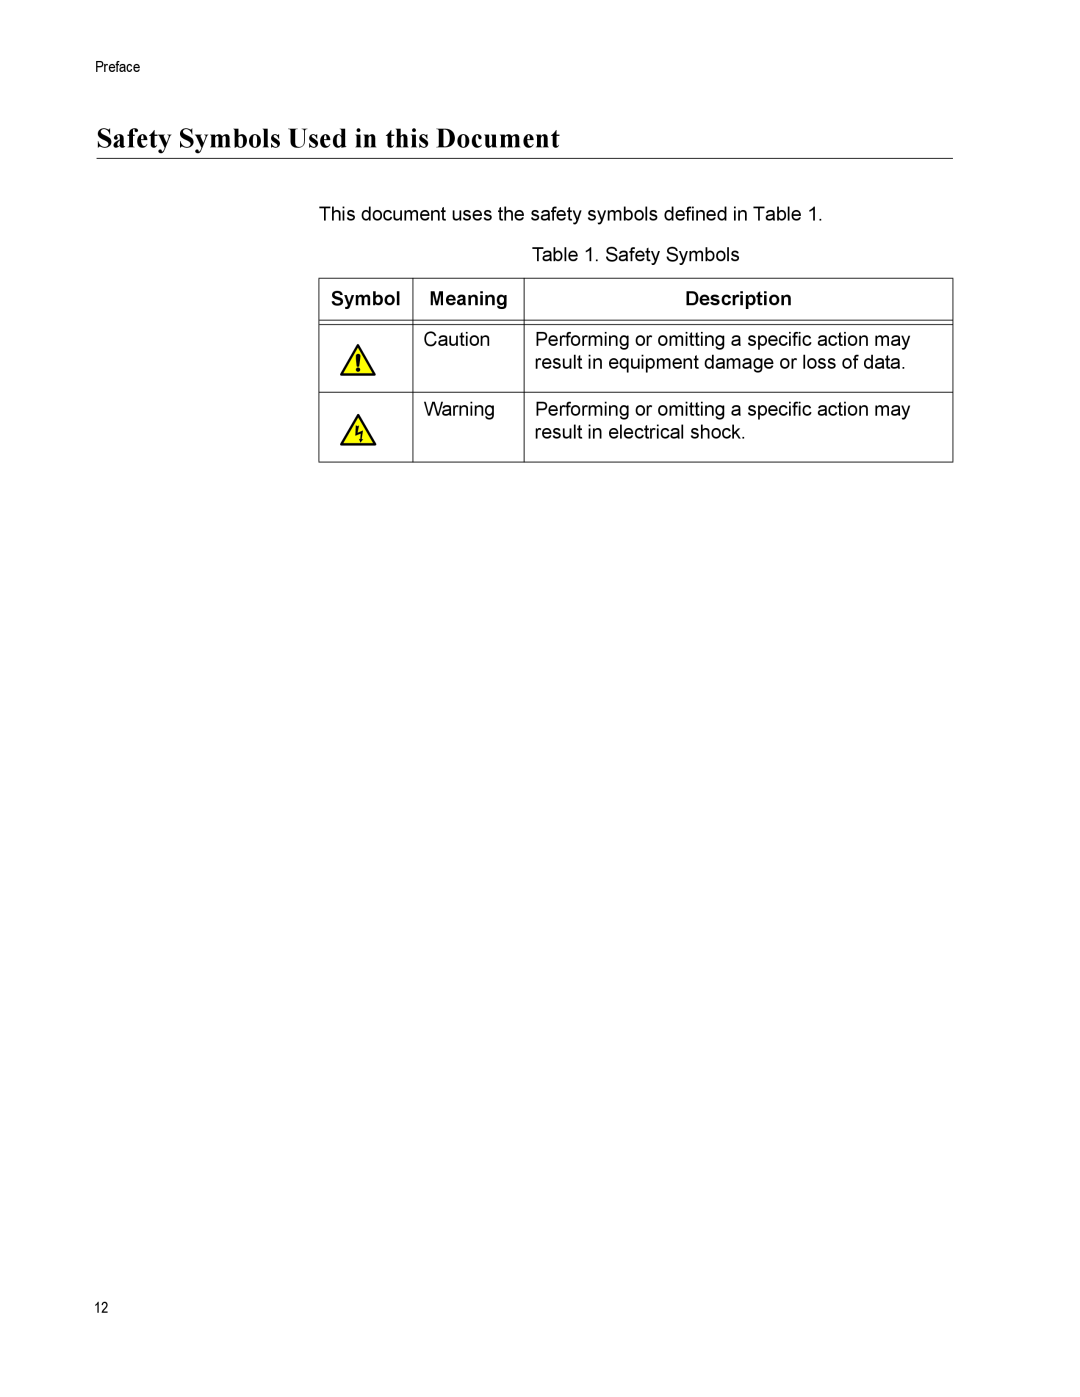 Allied Telesis AT-GS900/16 manual Safety Symbols Used in this Document, Meaning, Description 